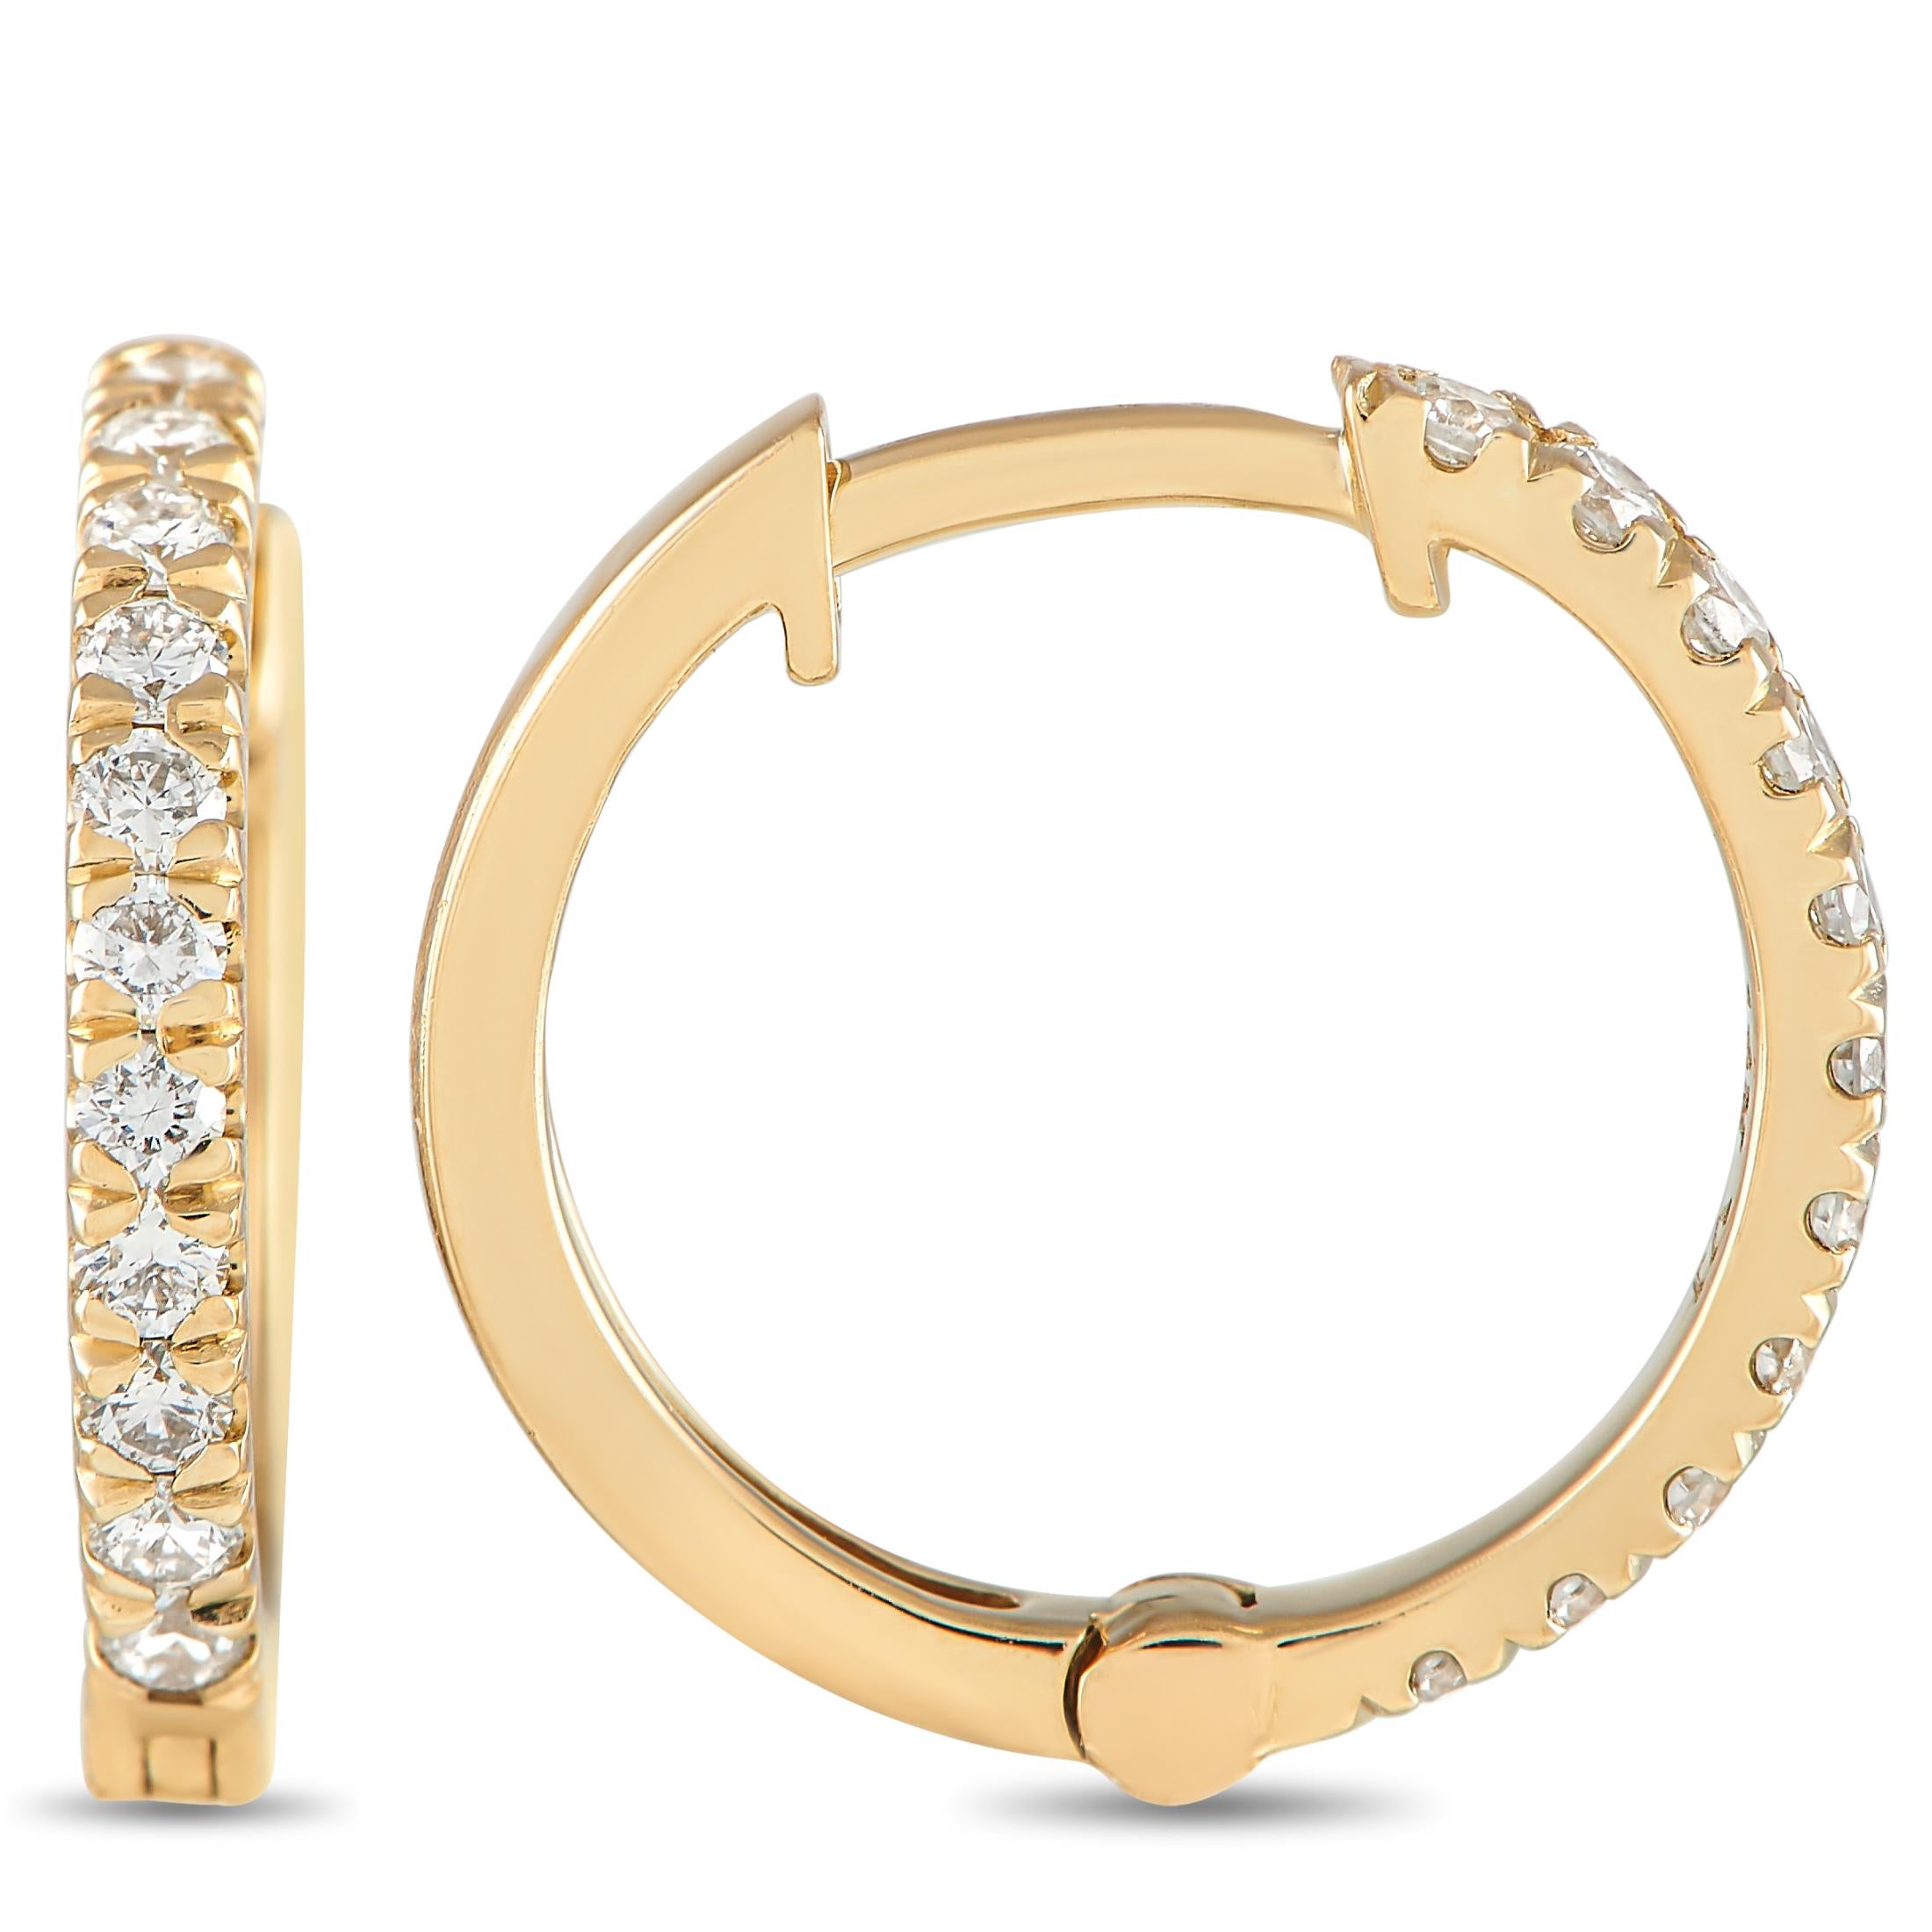 Diamonds with a total weight of 0.28 carats allow these classic hoop earrings to effortlessly reflect light. An opulent 14K Yellow Gold setting measuring 0.50” round makes these elegant luxury earrings ideal for absolutely any occasion. This jewelry